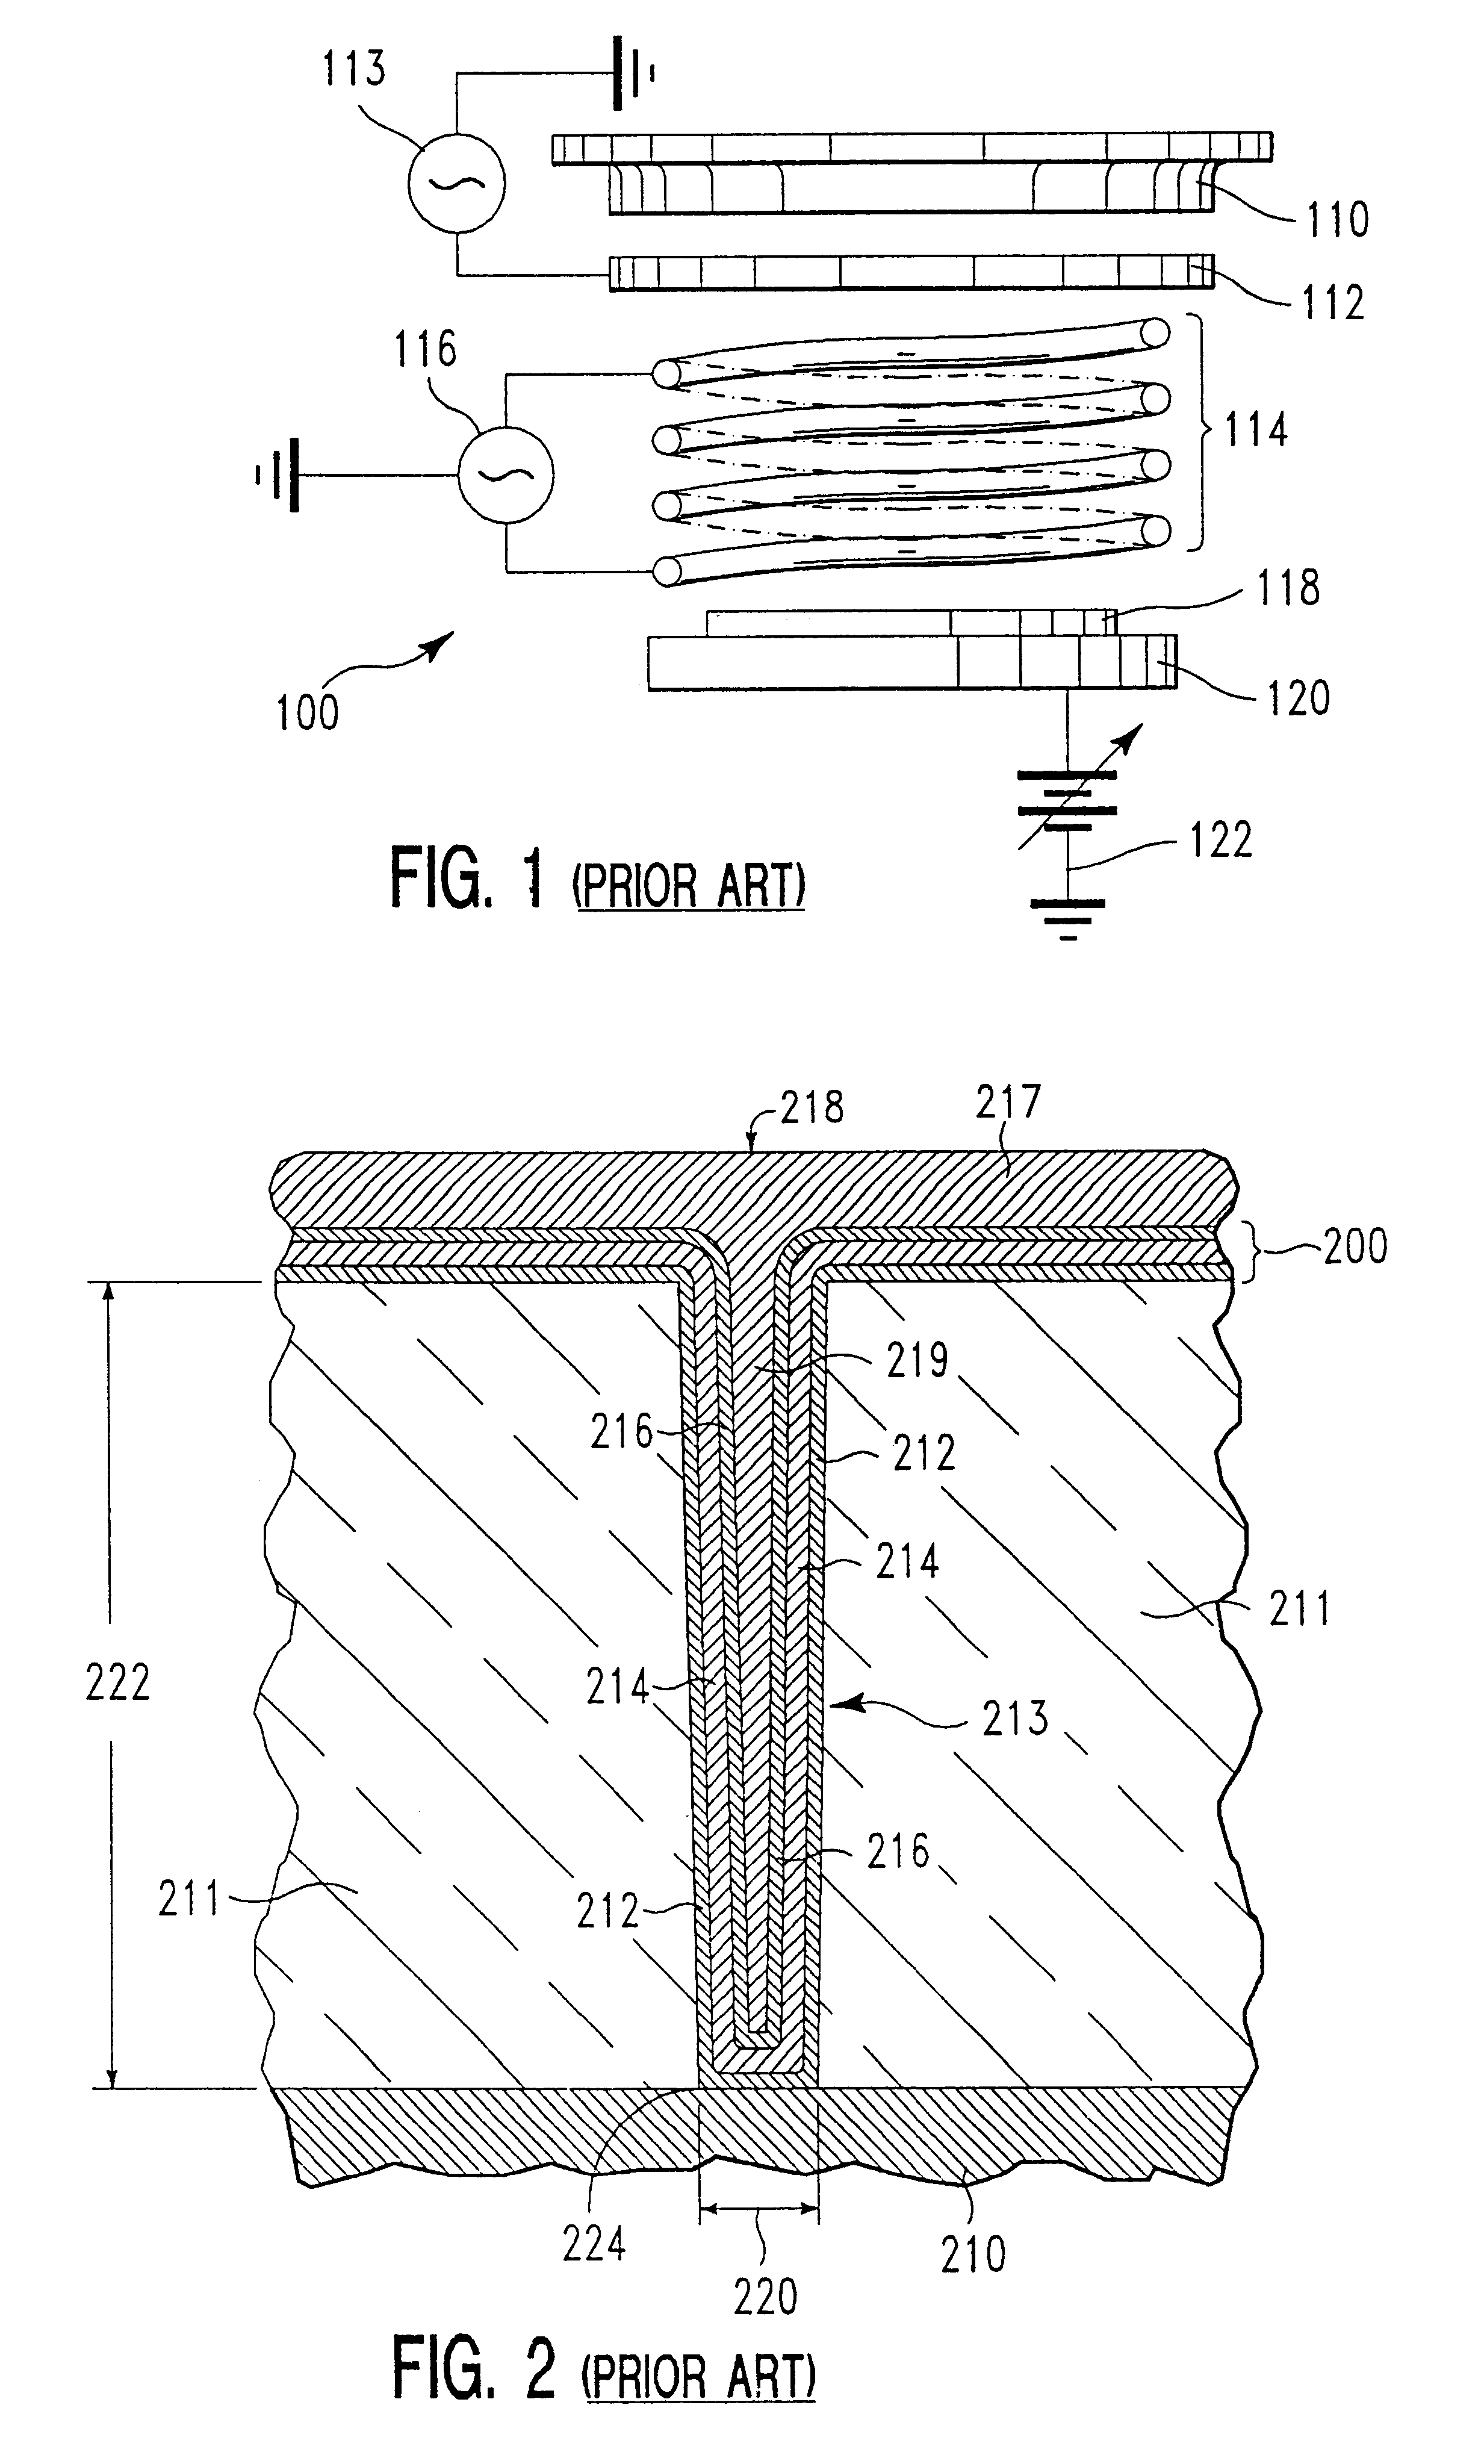 Ti/Tinx underlayer which enables a highly &lt;111&gt; oriented aluminum interconnect